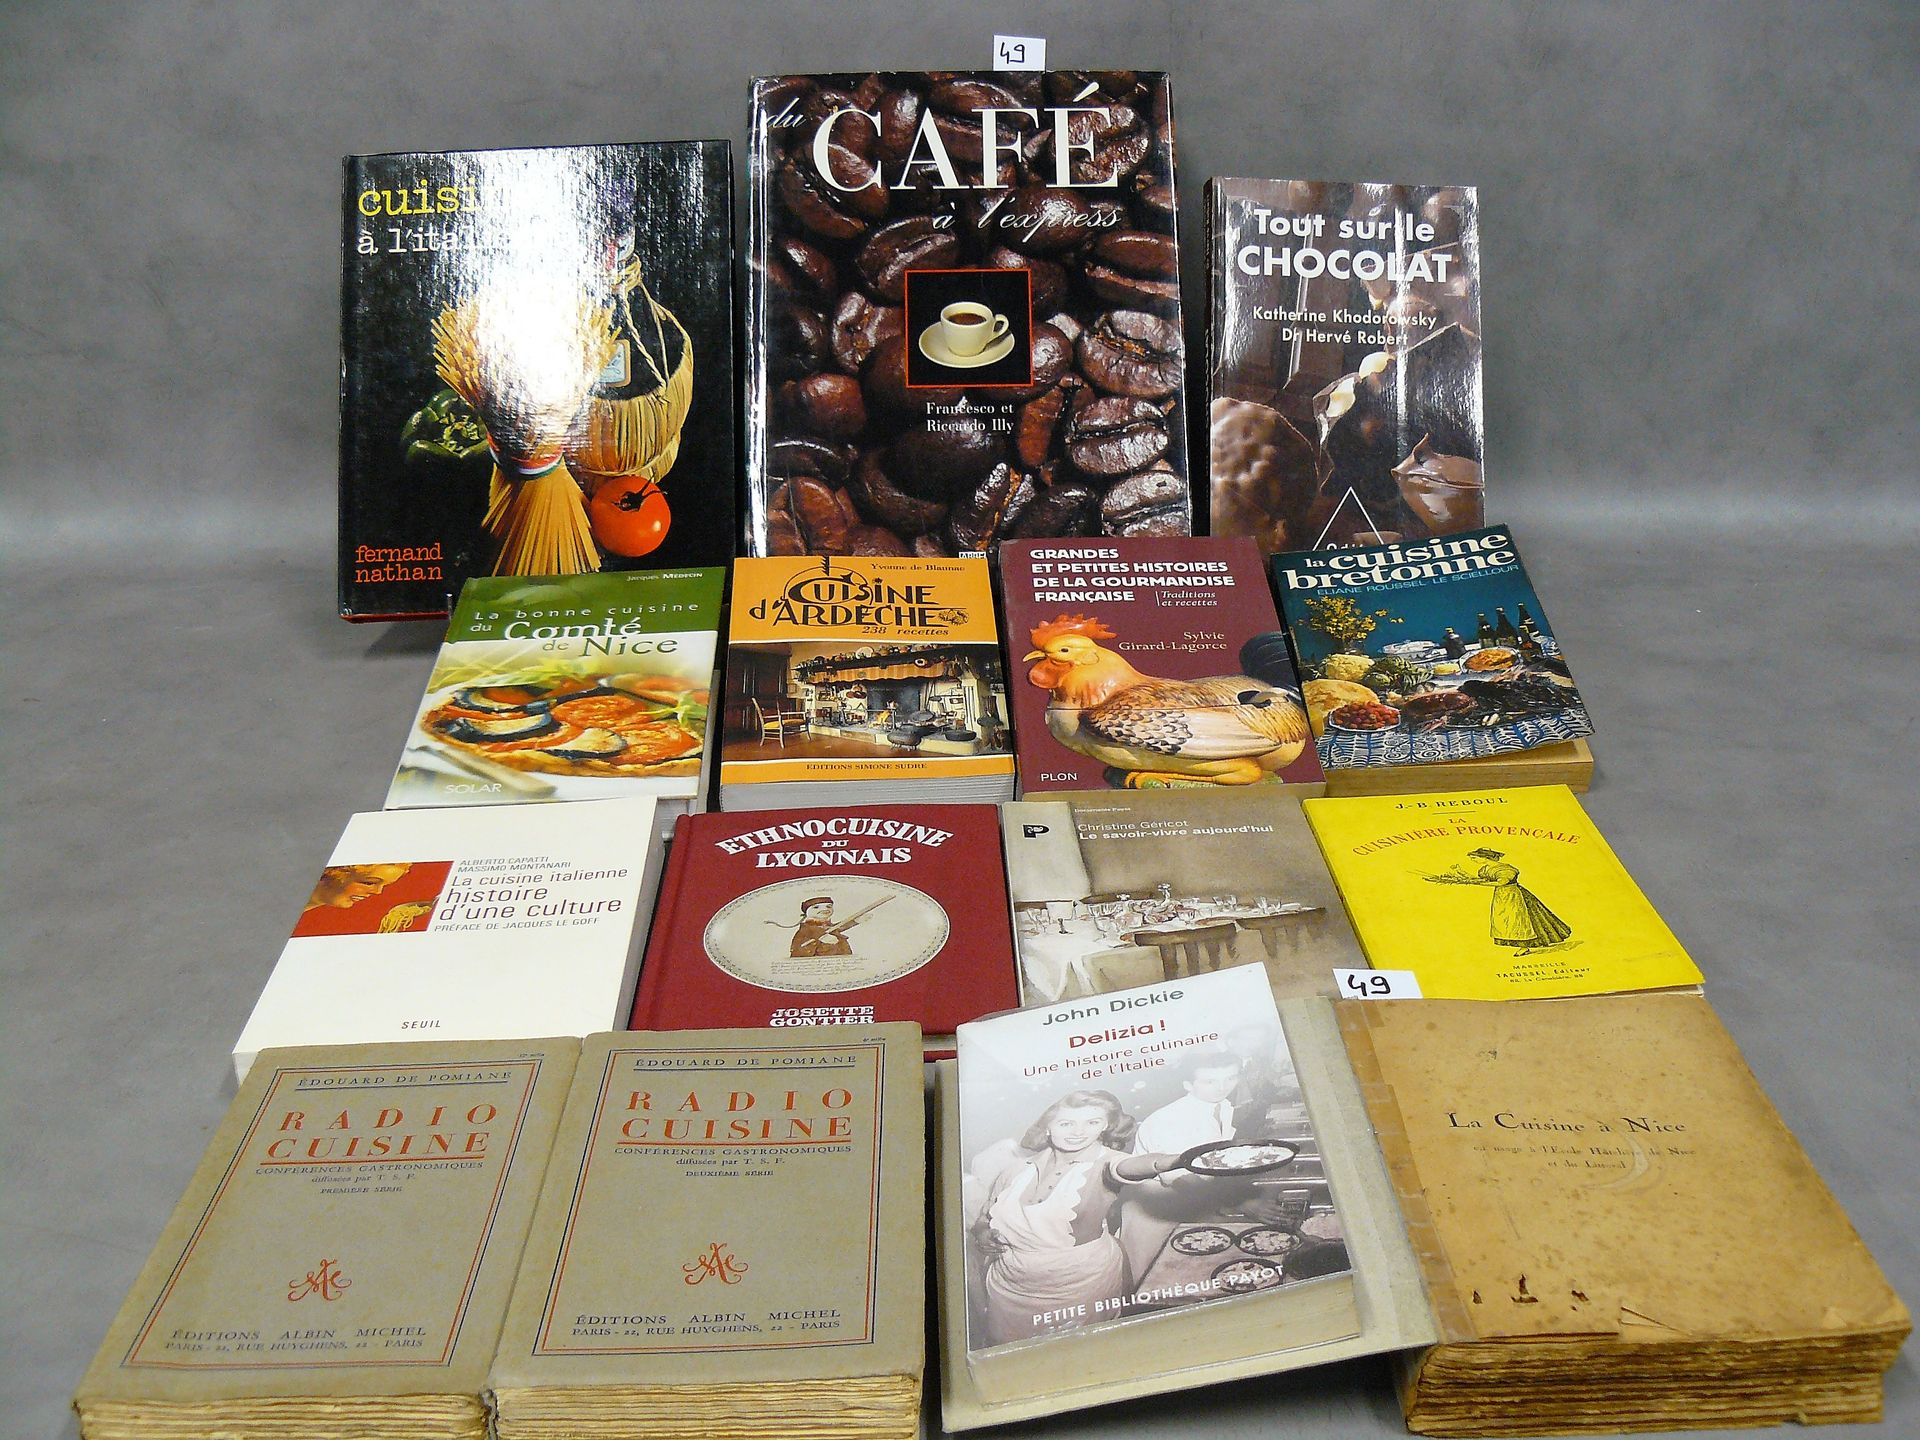 CUISINE lot of 15 books on cooking, coffee, chocolate, including: radio cuisine